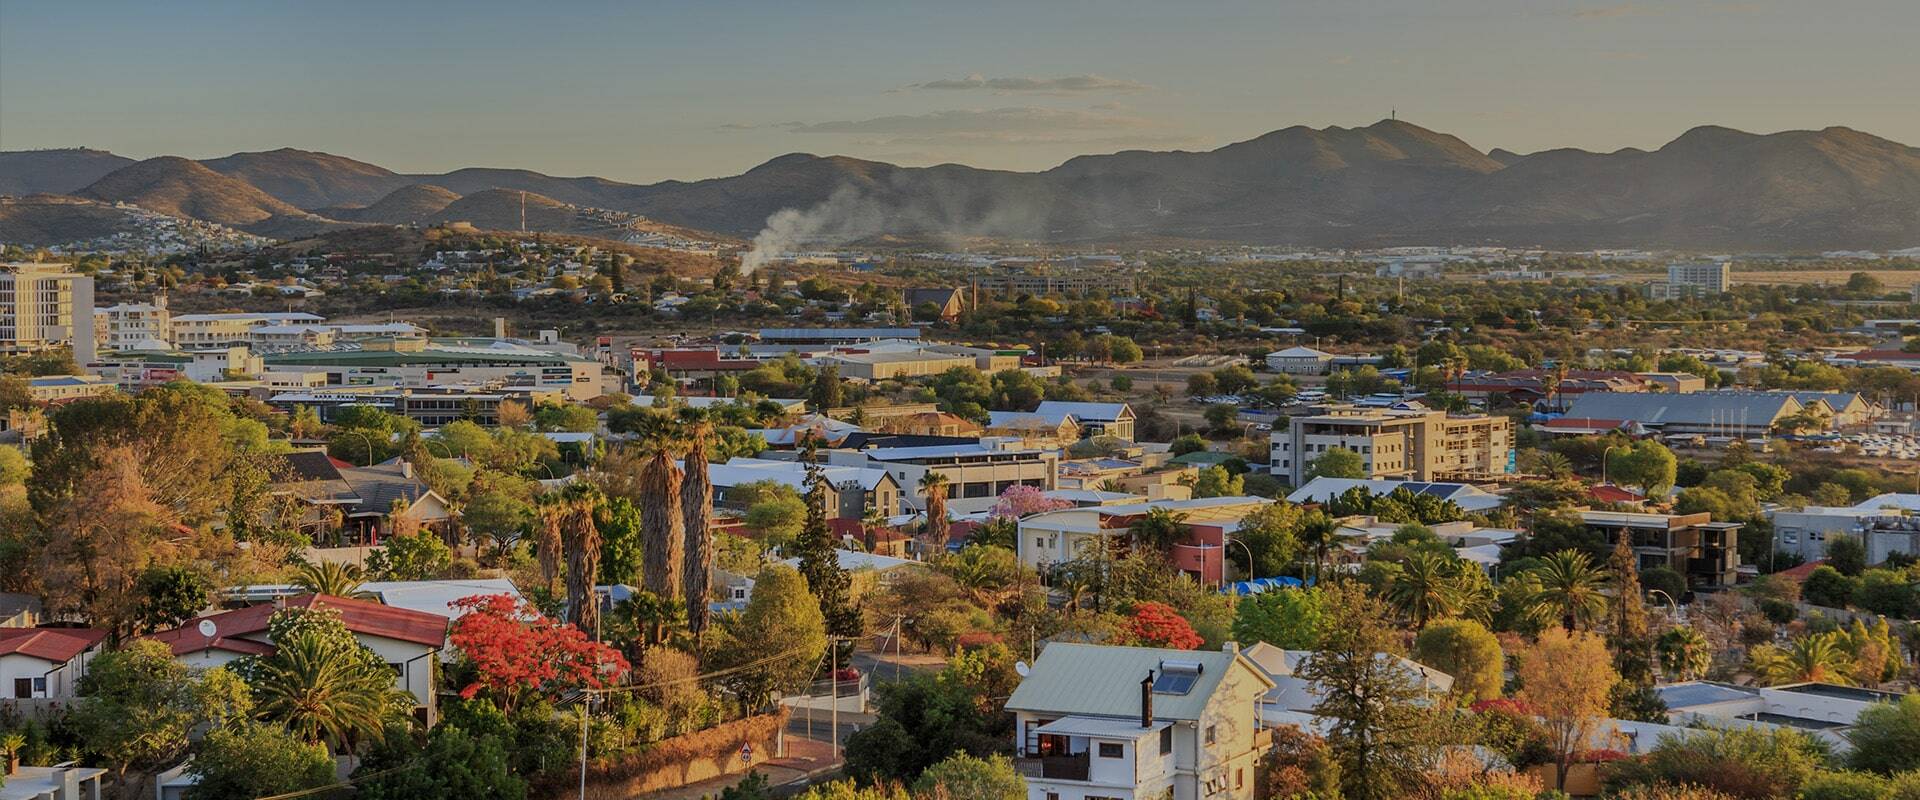 City view of Windhoek in Namibia